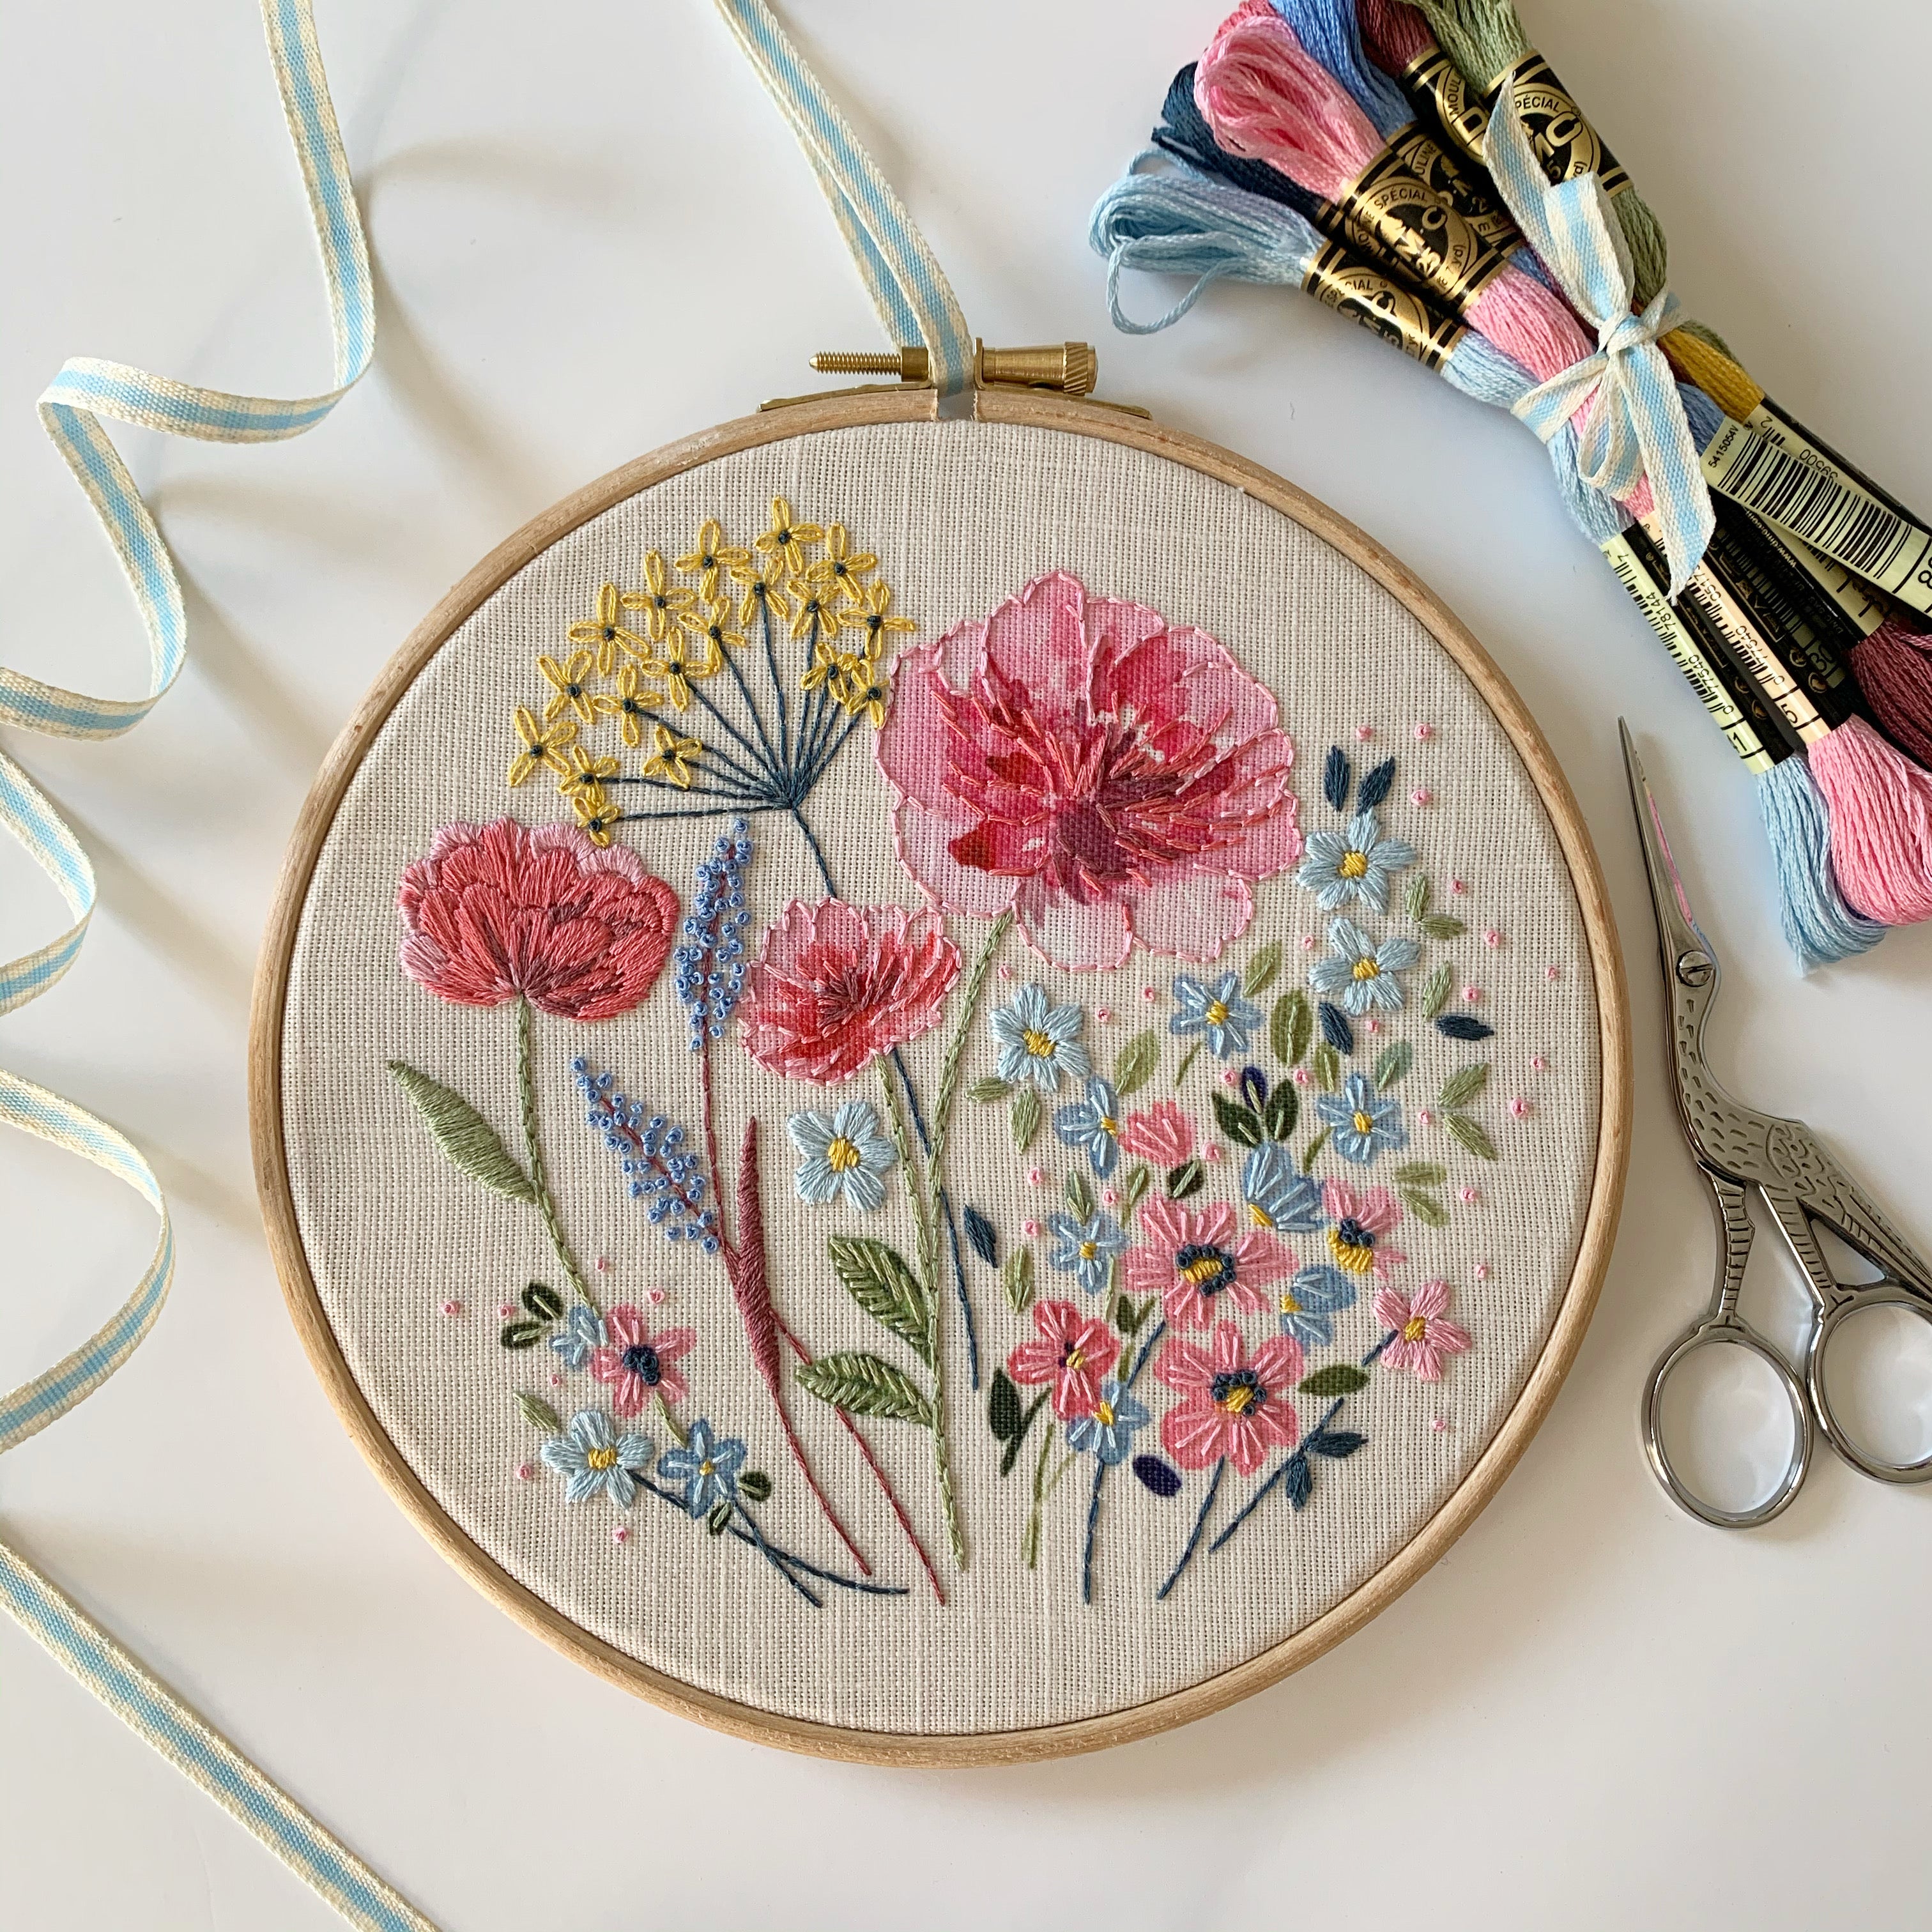 Embroidery hoops, frames and stands. – Madaher